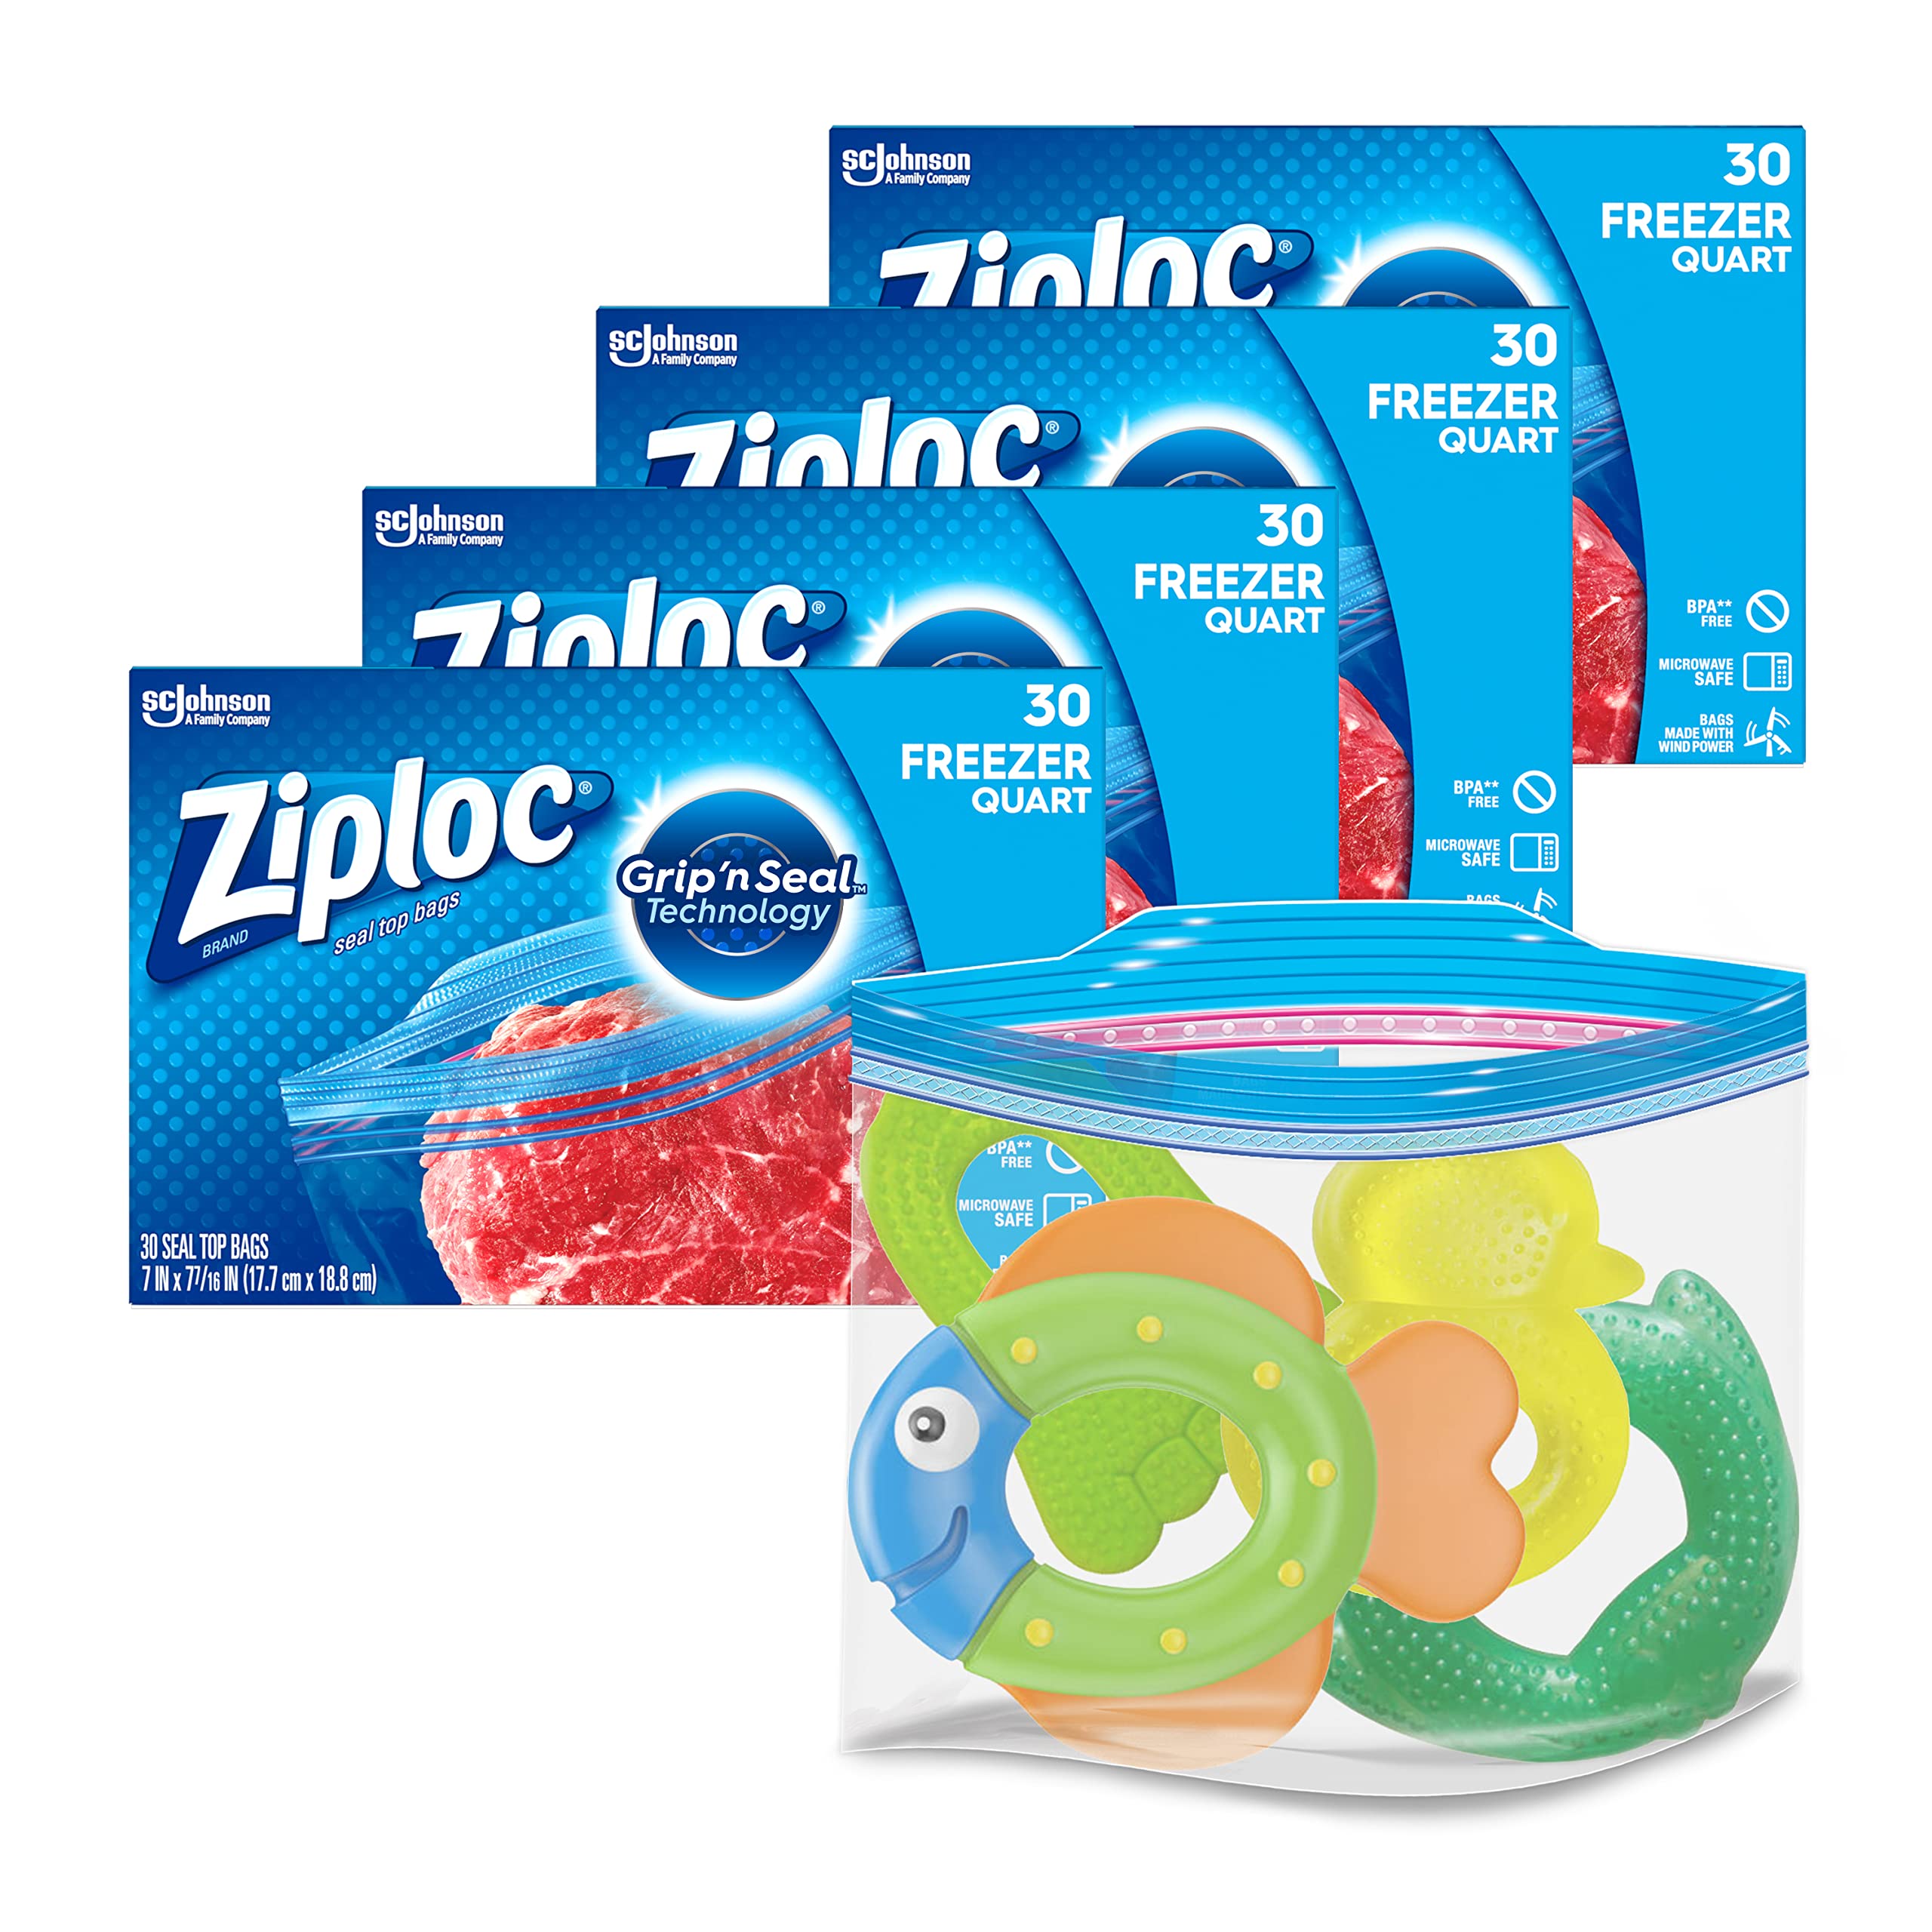 Ziploc Quart Food Storage Freezer Bags, Grip 'n Seal Technology for Easier  Grip, Open, and Close